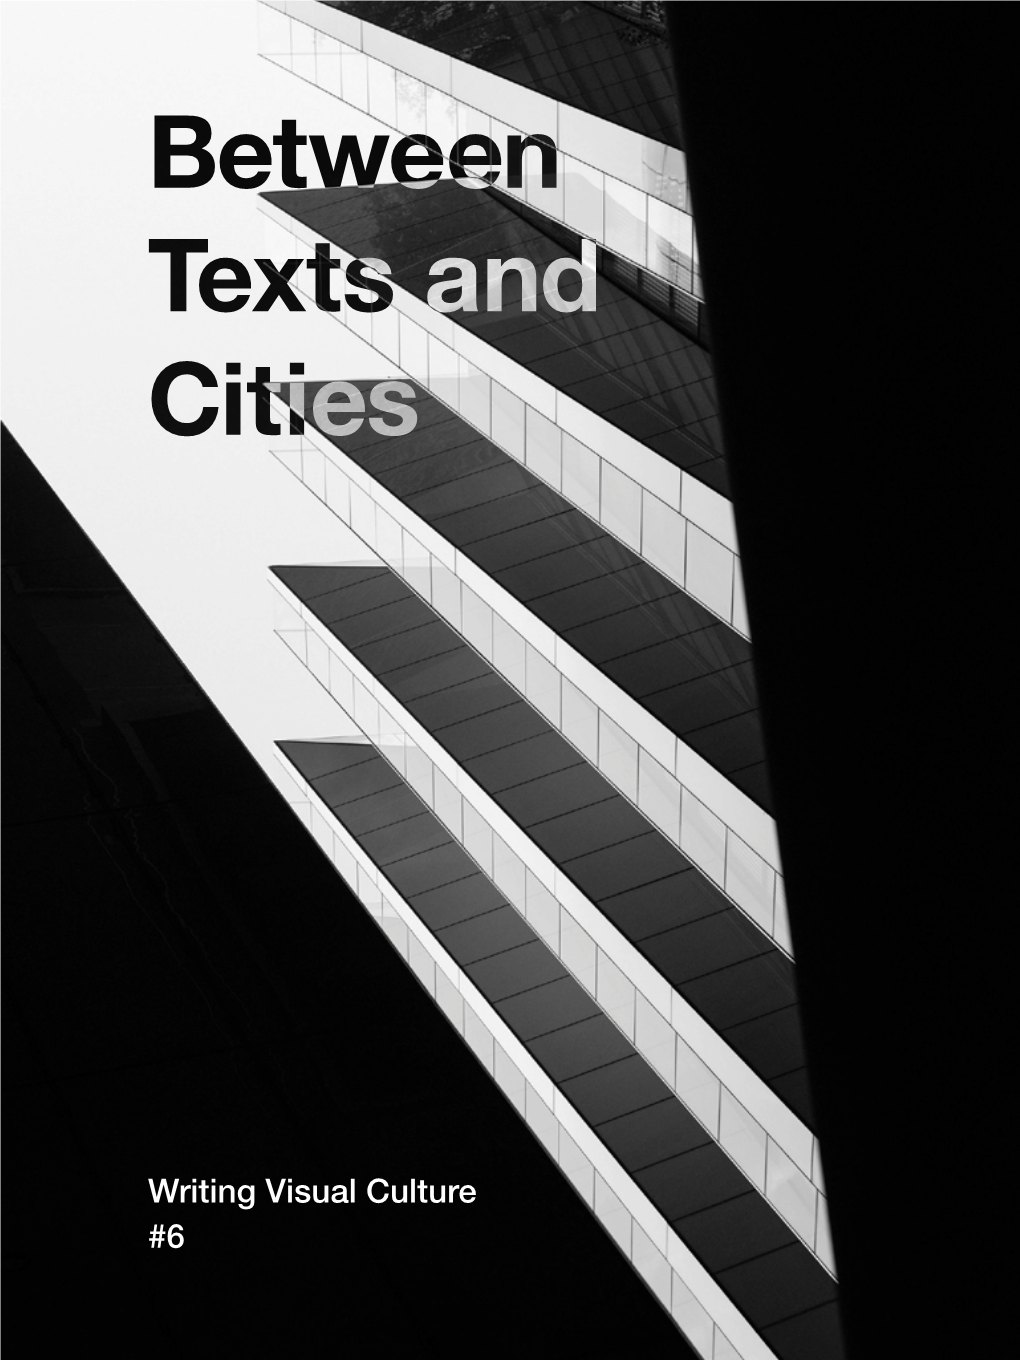 Writing Visual Culture Volume 6 Between Texts and Cities Dr Daniel Marques Sampaio and Michael Heilgemeir